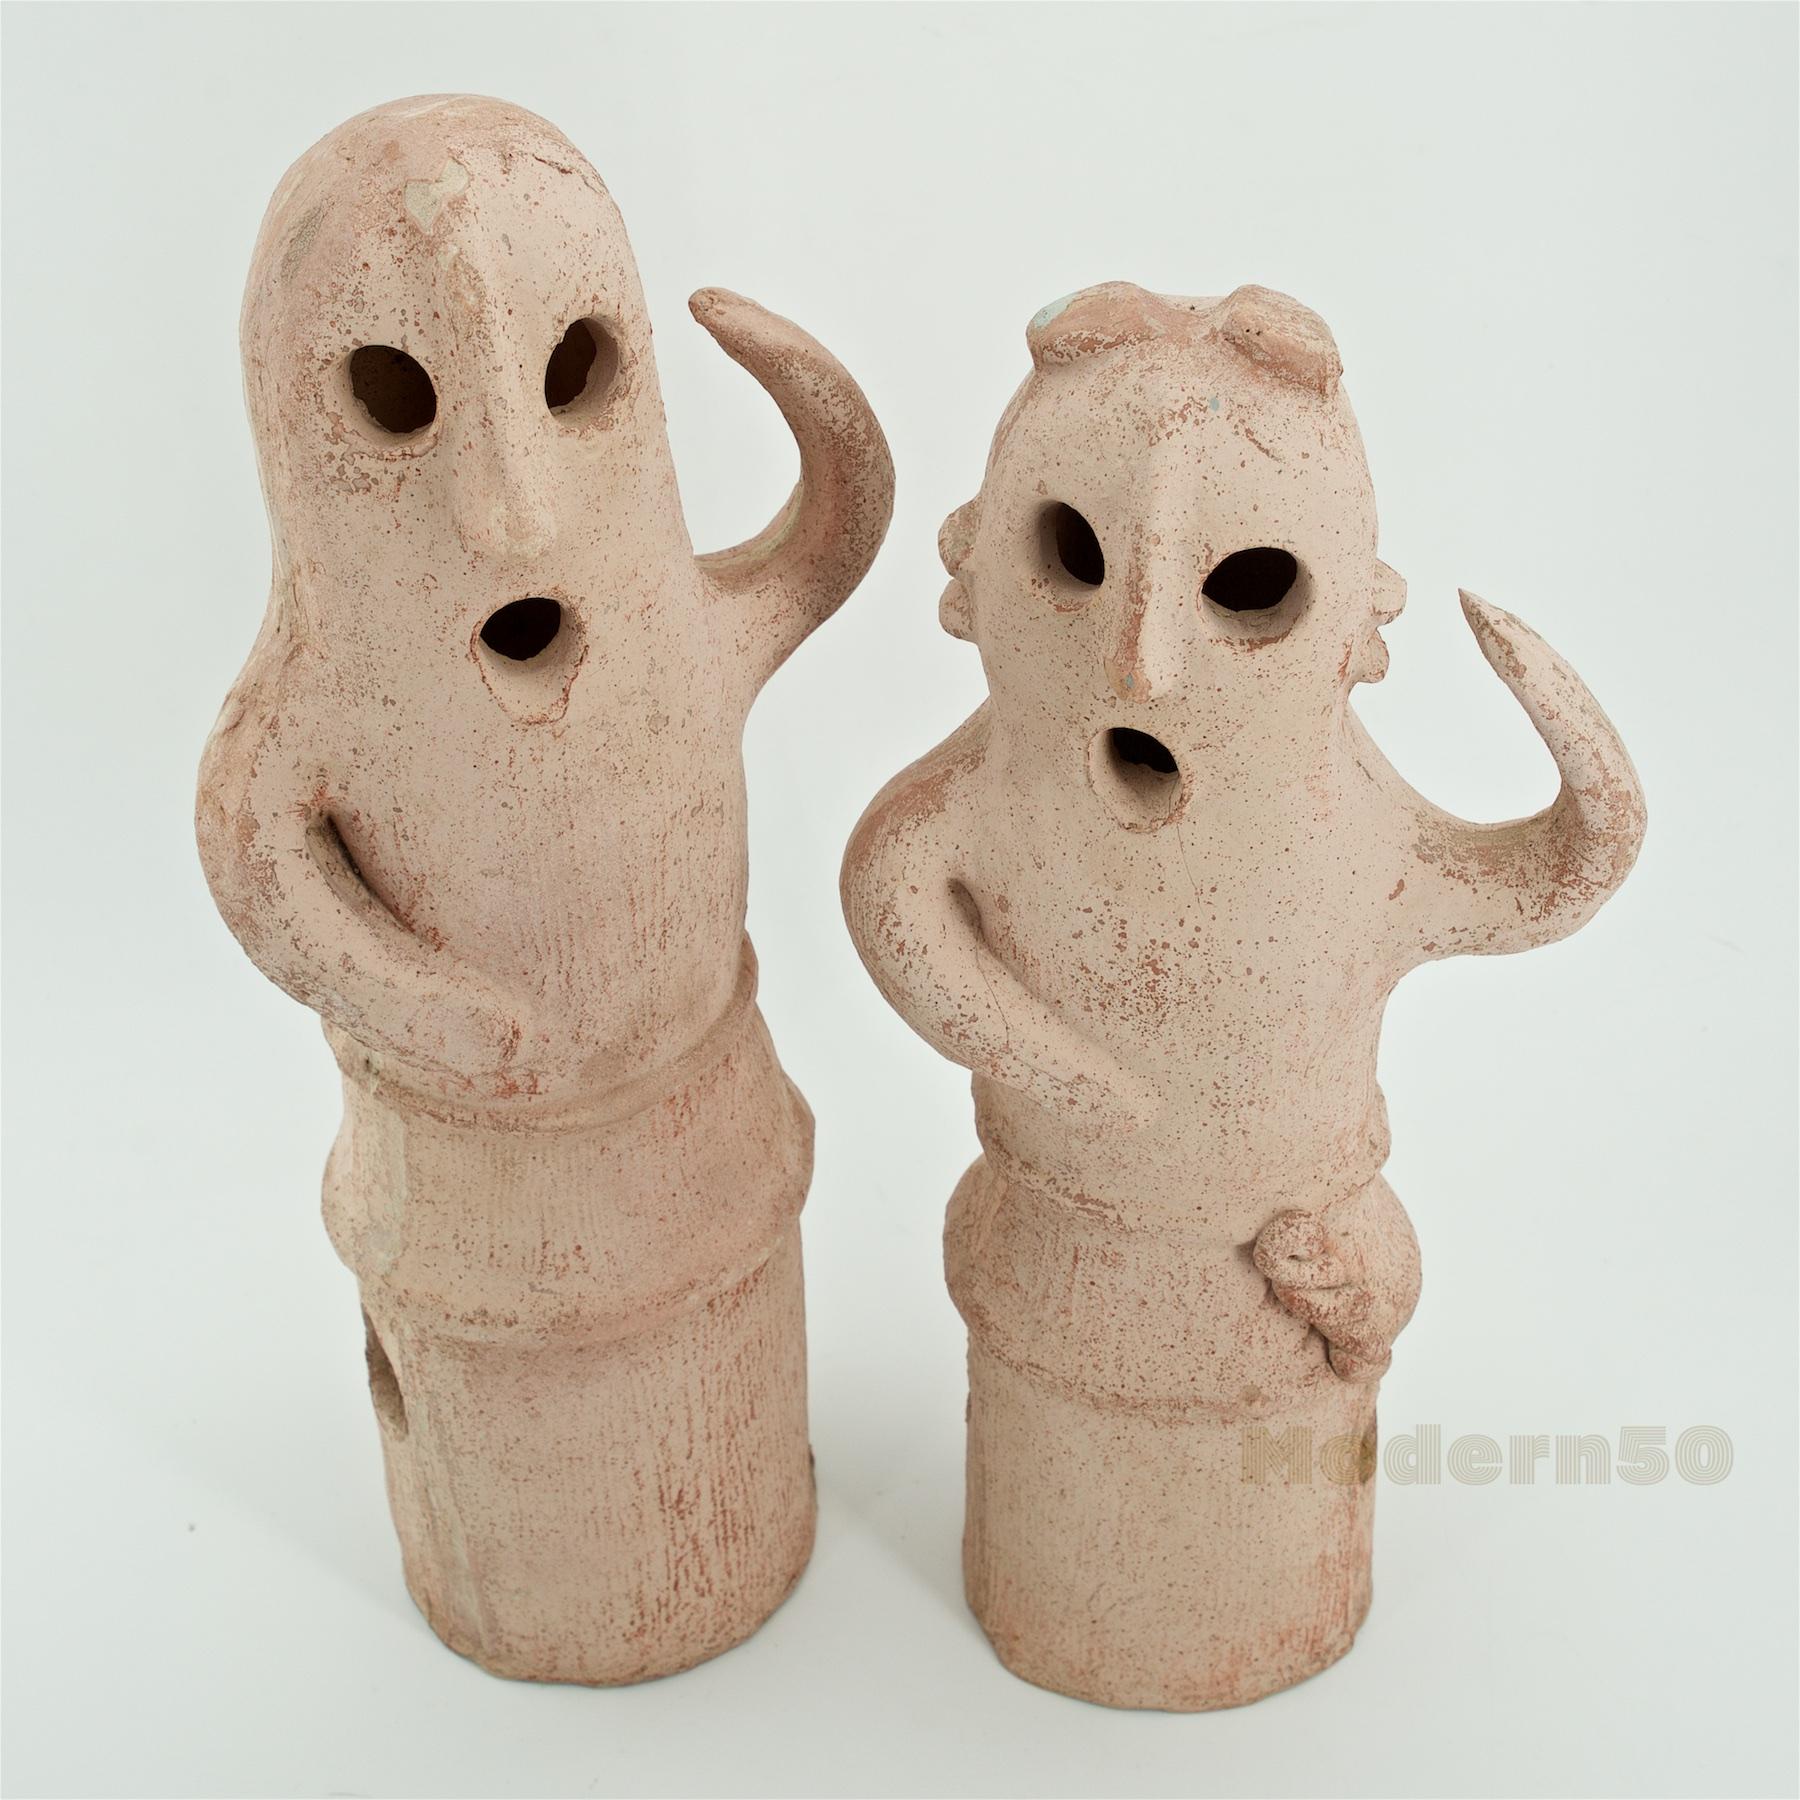 Mid-20th Century Replicas. Interesting ghost-like figural sculptures, of Man and Woman, 13 and 12 inches high.  Terracotta mixed with paper or paper clay, exact age unknown, procured from a time capsule estate. These sculptures are known as 